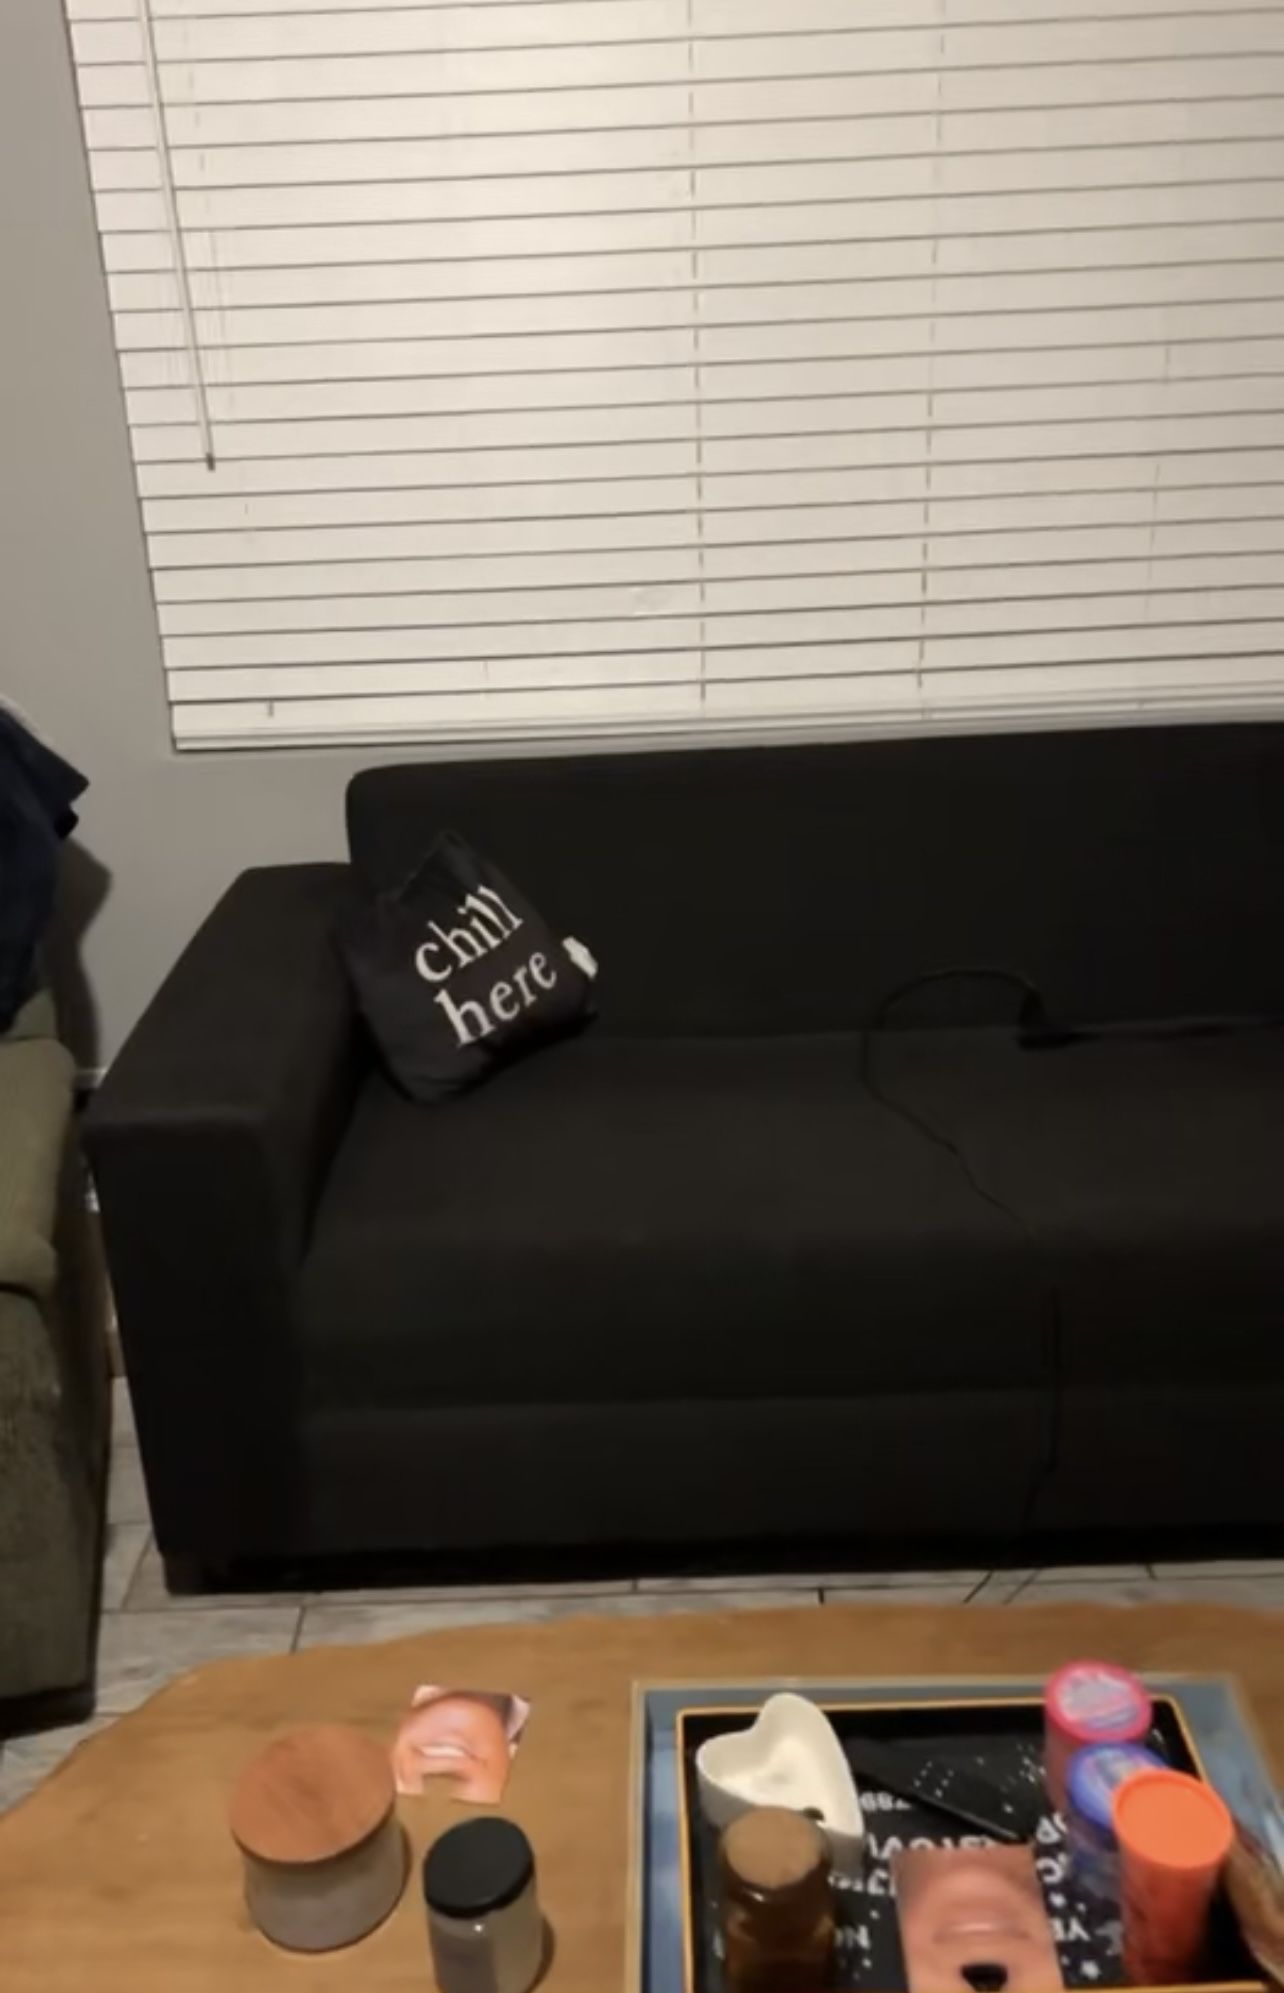 Black Sectional Couch